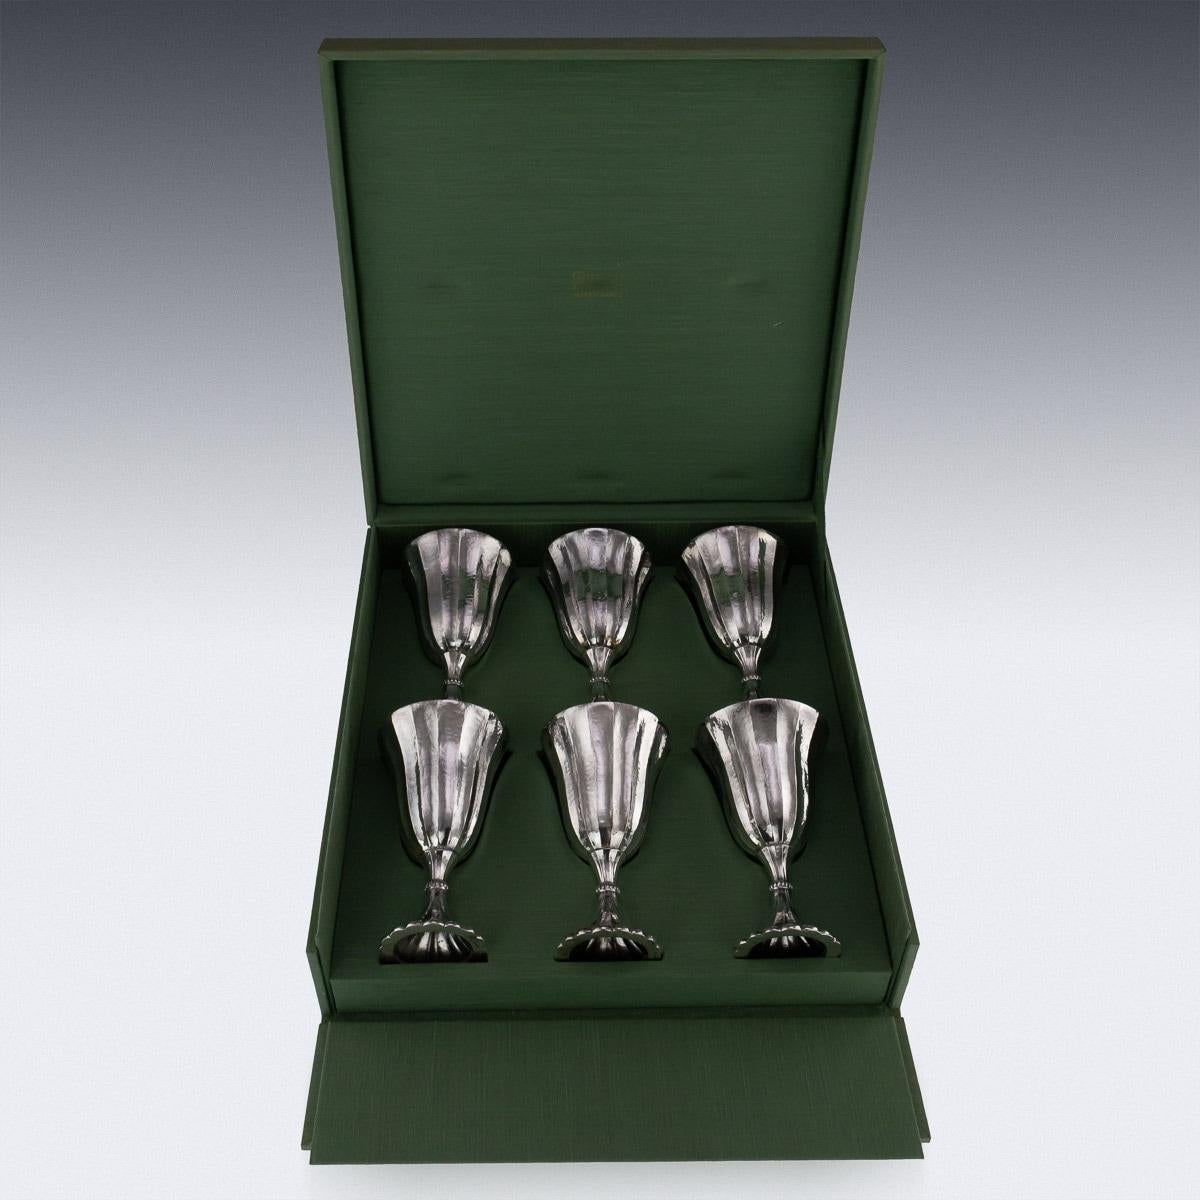 Description

Stunning 20th century Buccellati solid silver set of six large wine goblets, magnificent size and weight, lightly spot-hammered with fluted bowls and bases, cast beaded base rims, set comes in its original retail case. Hallmarked on